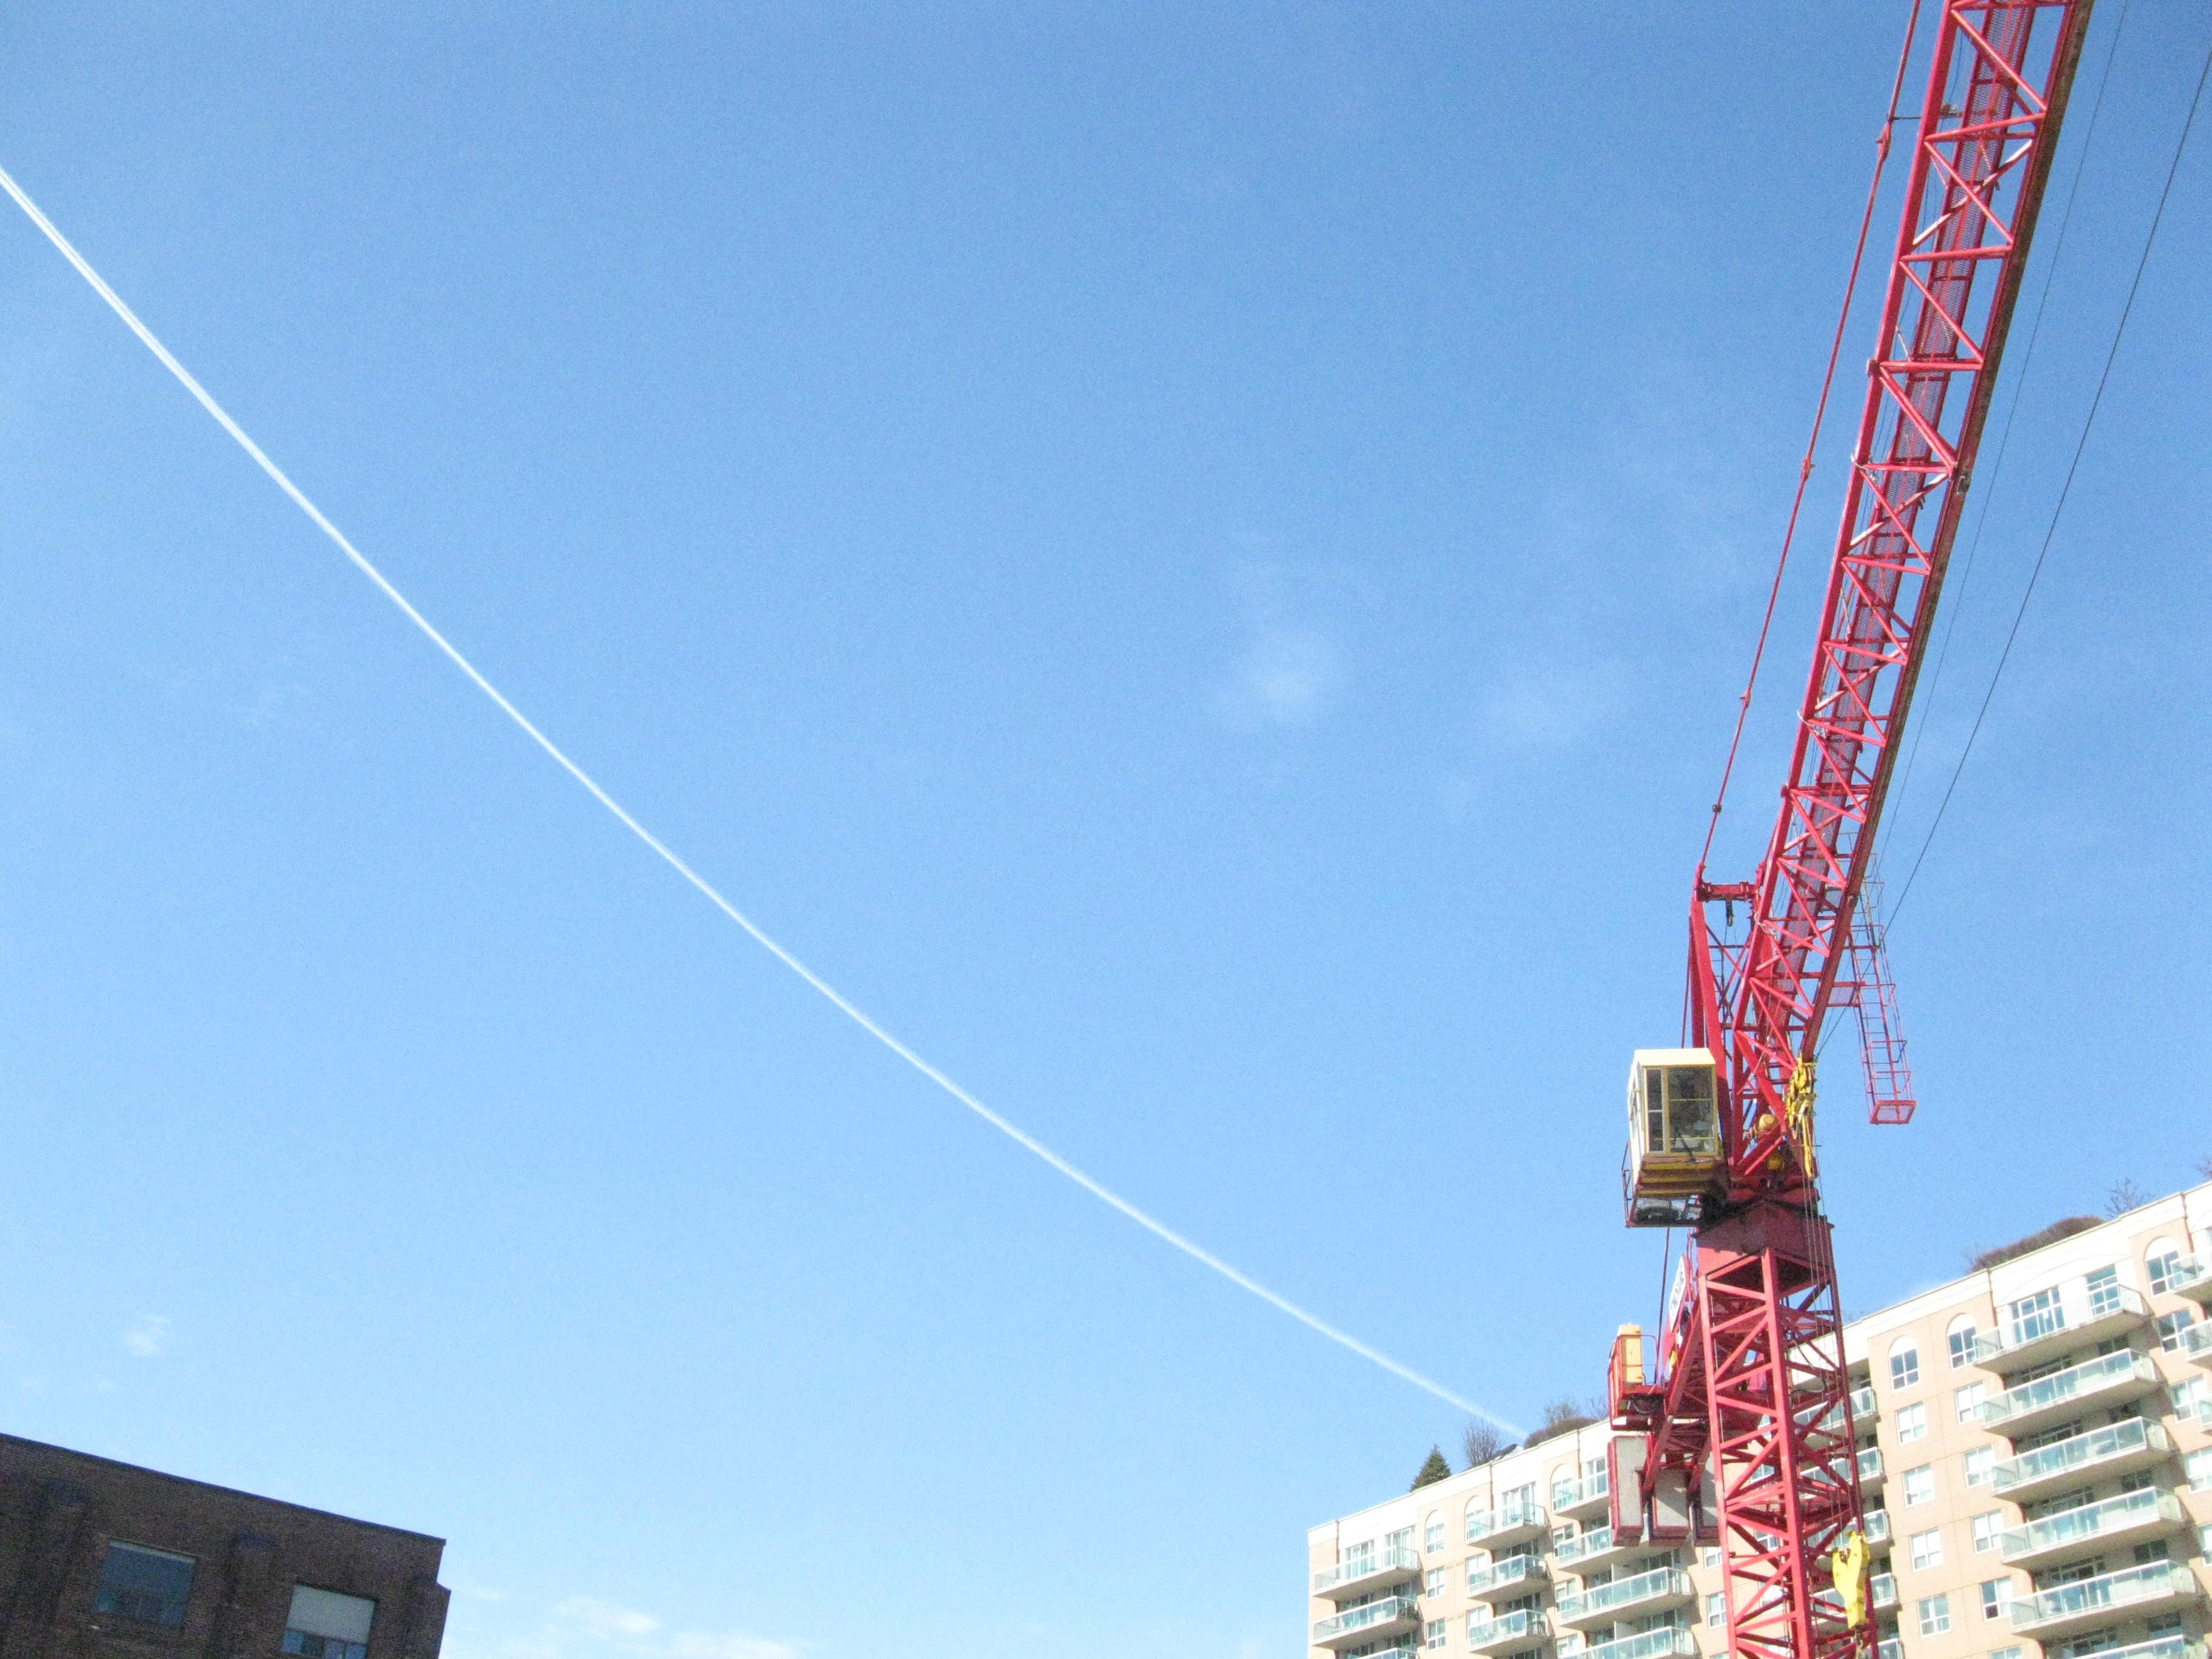 Construction, corner of adelaide and princess, 2013 02 18 -dx.jpg photo